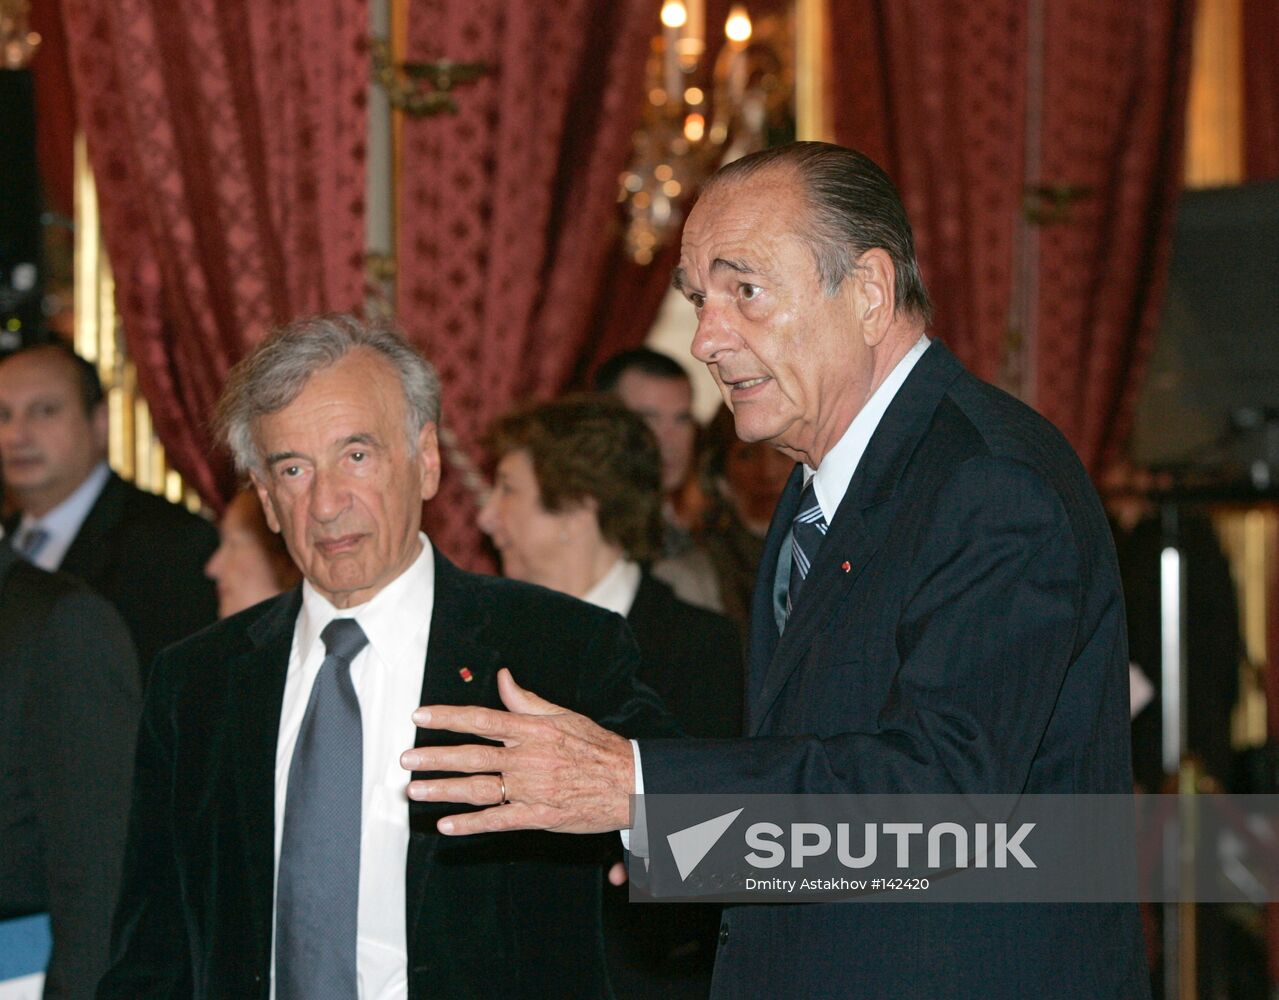 ELIE WIESEL, JACQUES CHIRAC 